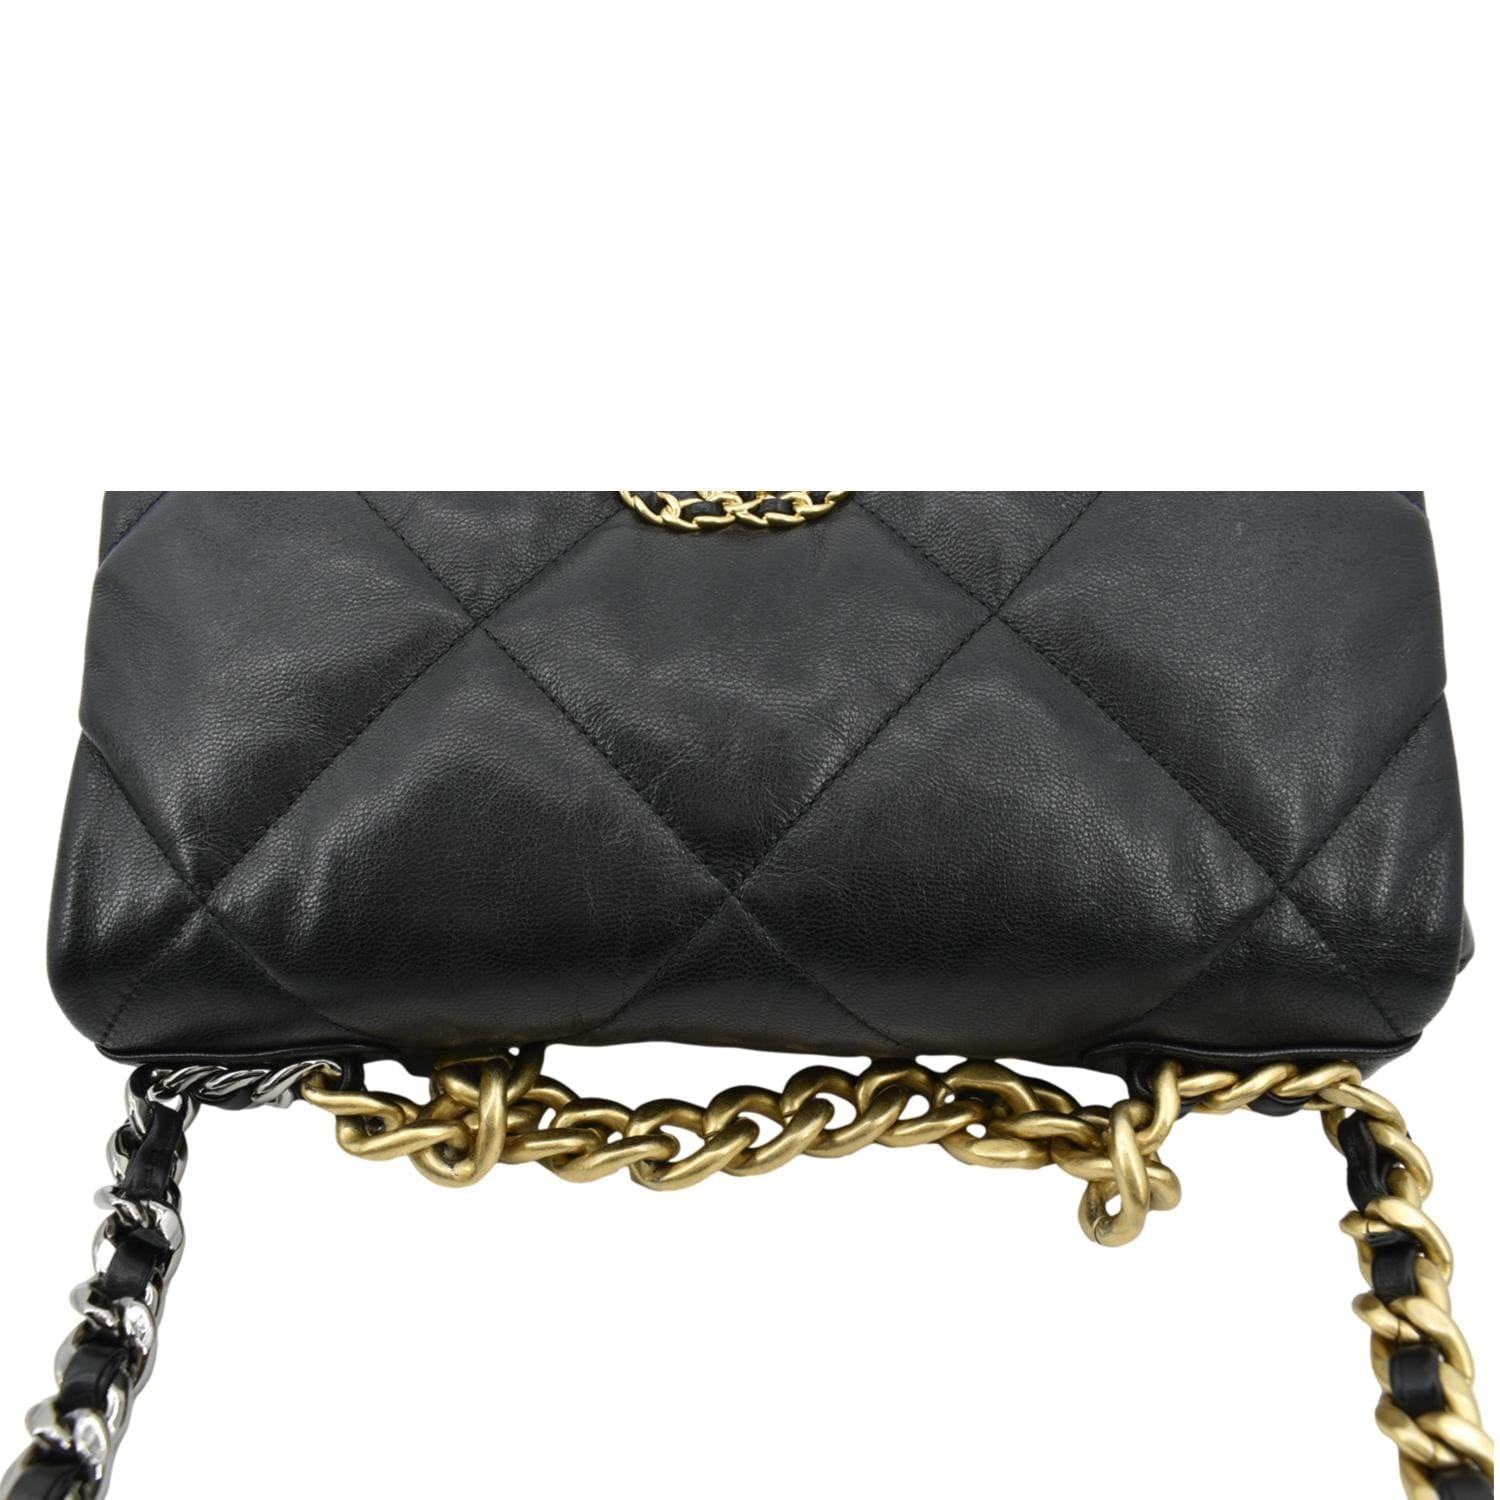 CHANEL, Bags, 991 Vintage Chanel Cosmetic Bag